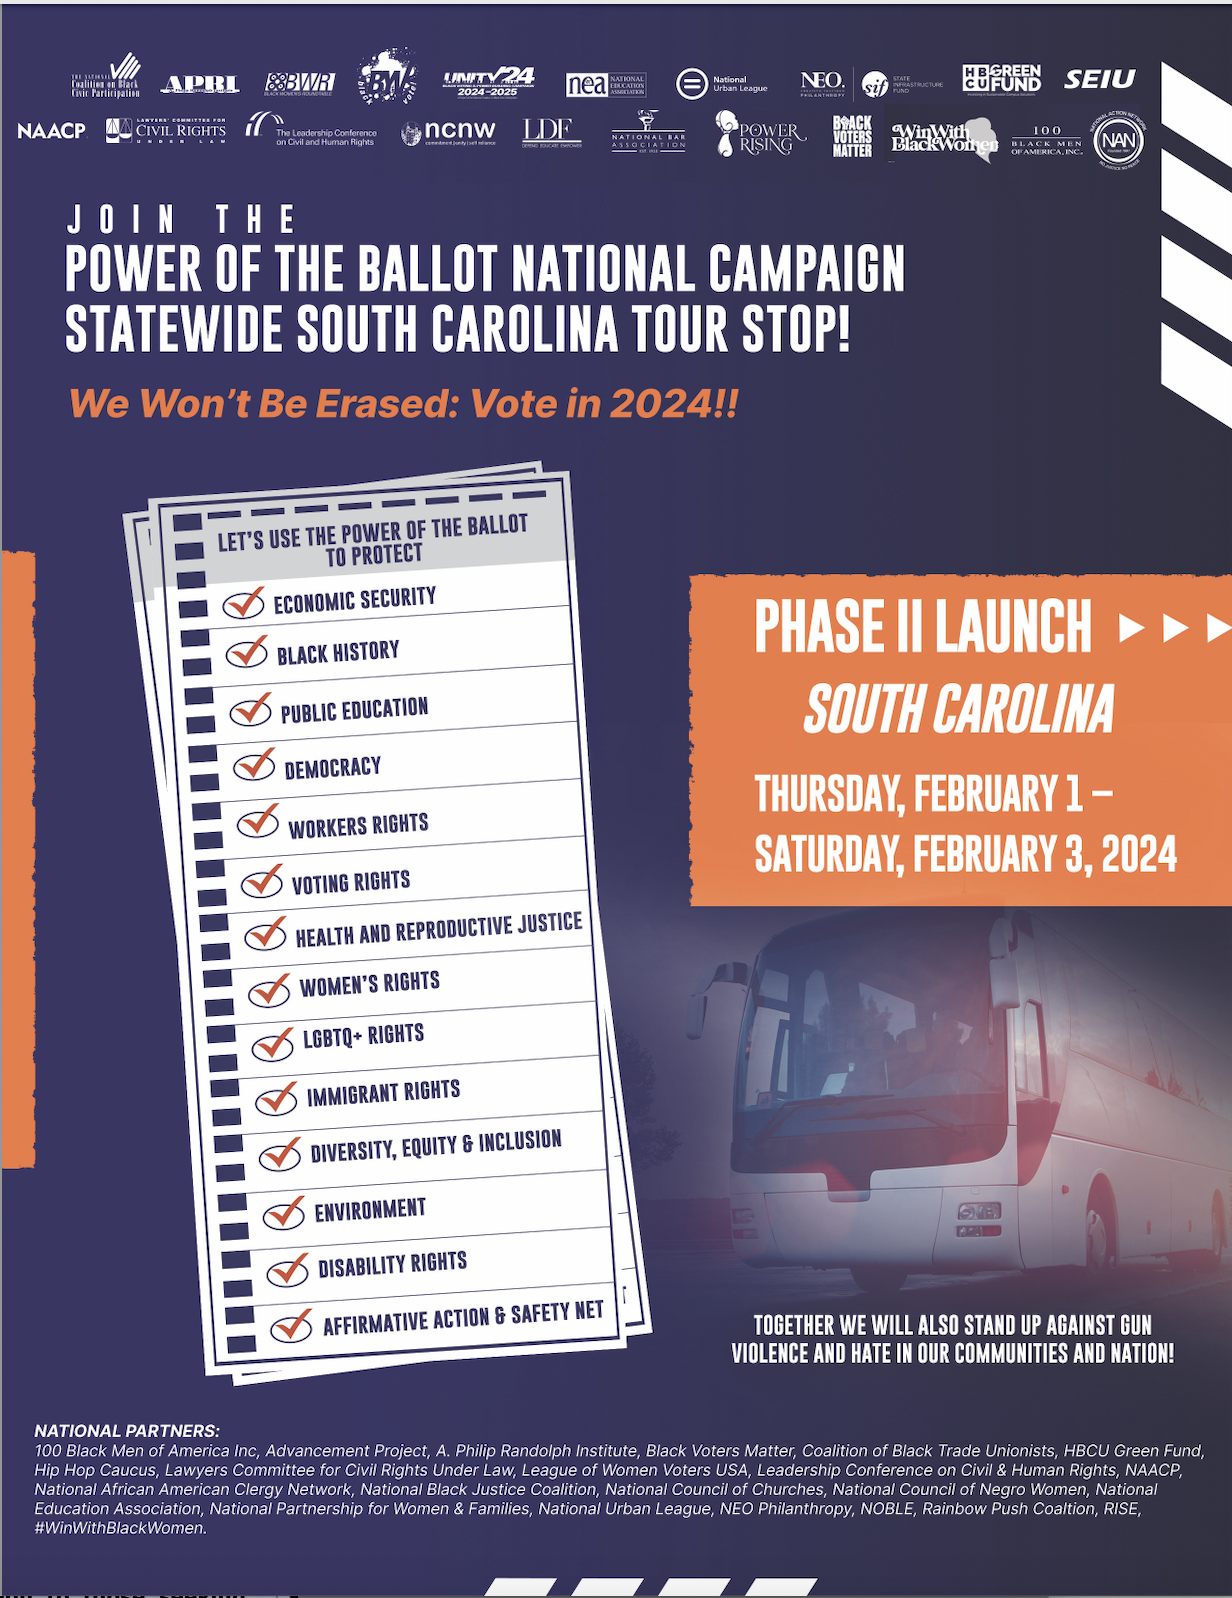 National and State Organizations Join Forces to Launch Phase II of the NCBCP Unity 2024 “Power of the Ballot” National Campaign to Mobilize Voters for Early Voting in SC